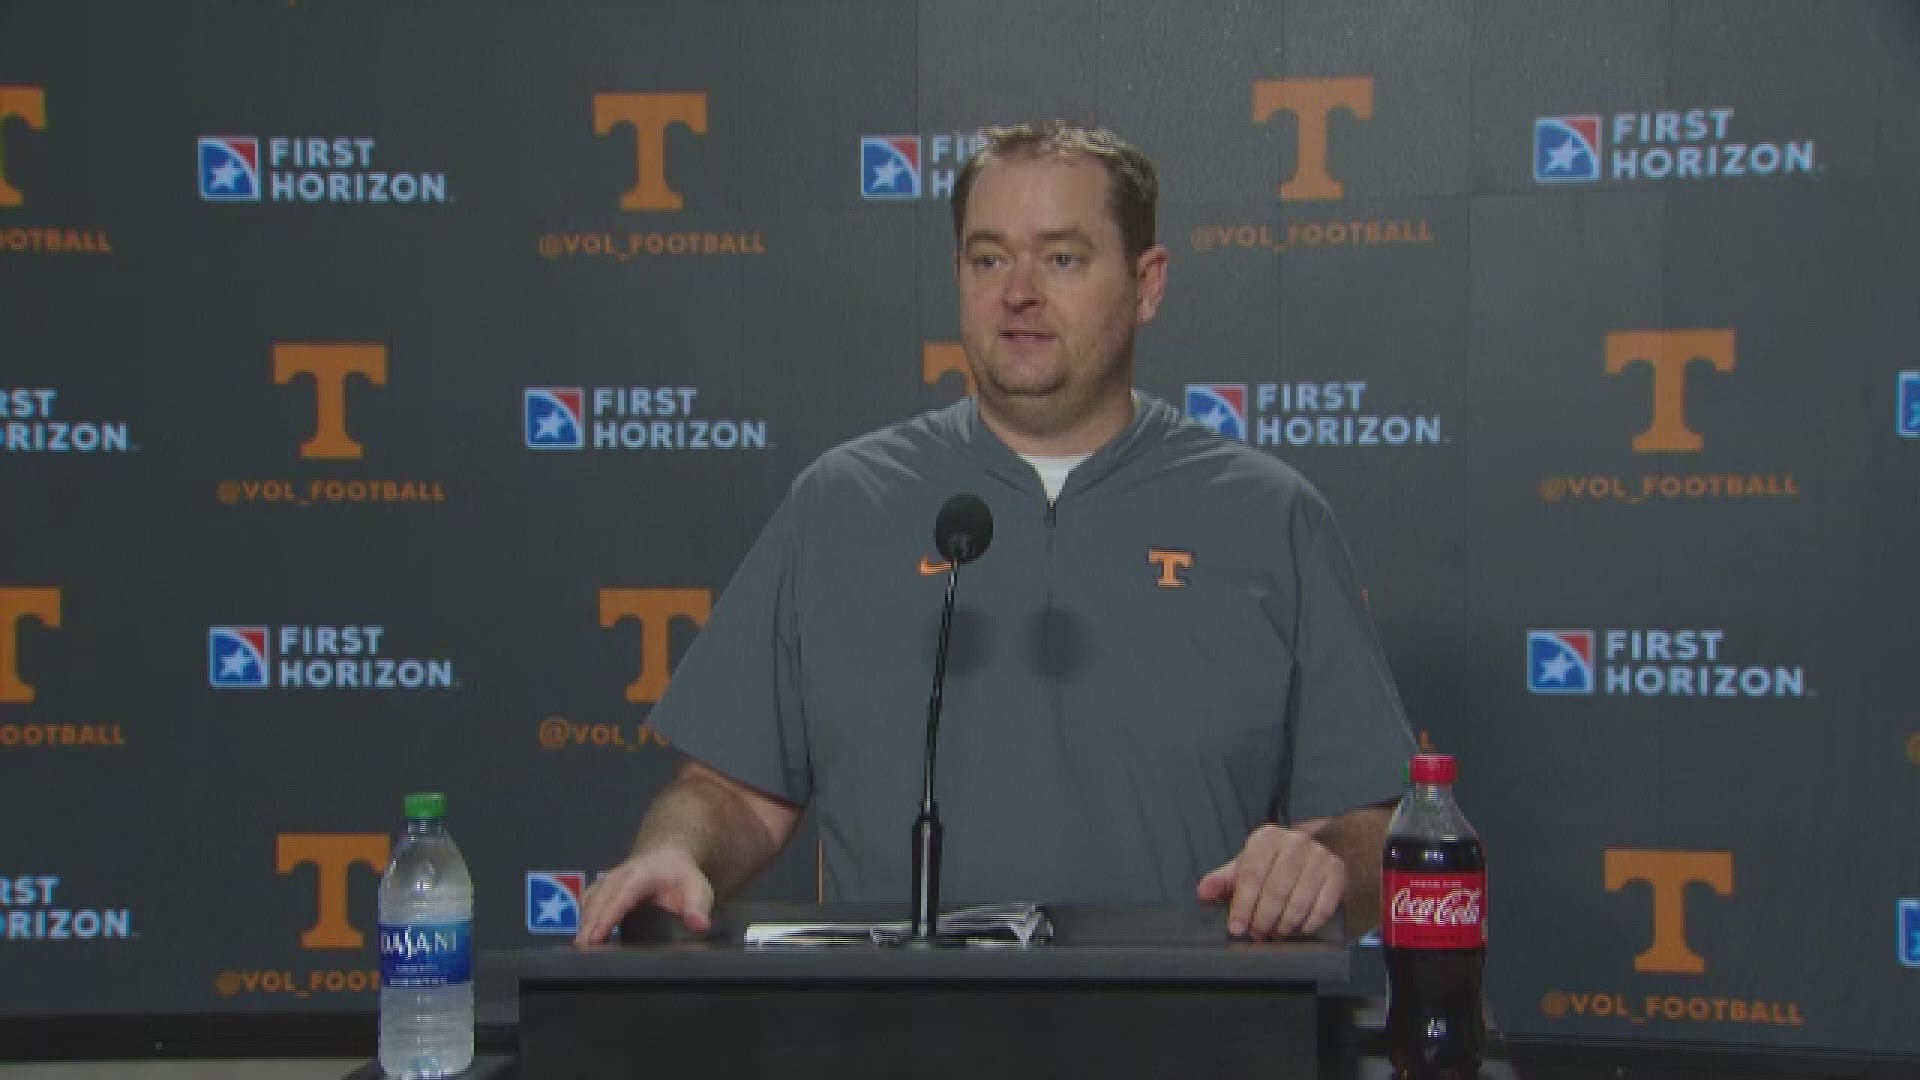 Tennessee held its first spring practice on Thursday. Coach Heupel spoke to media members afterwards.